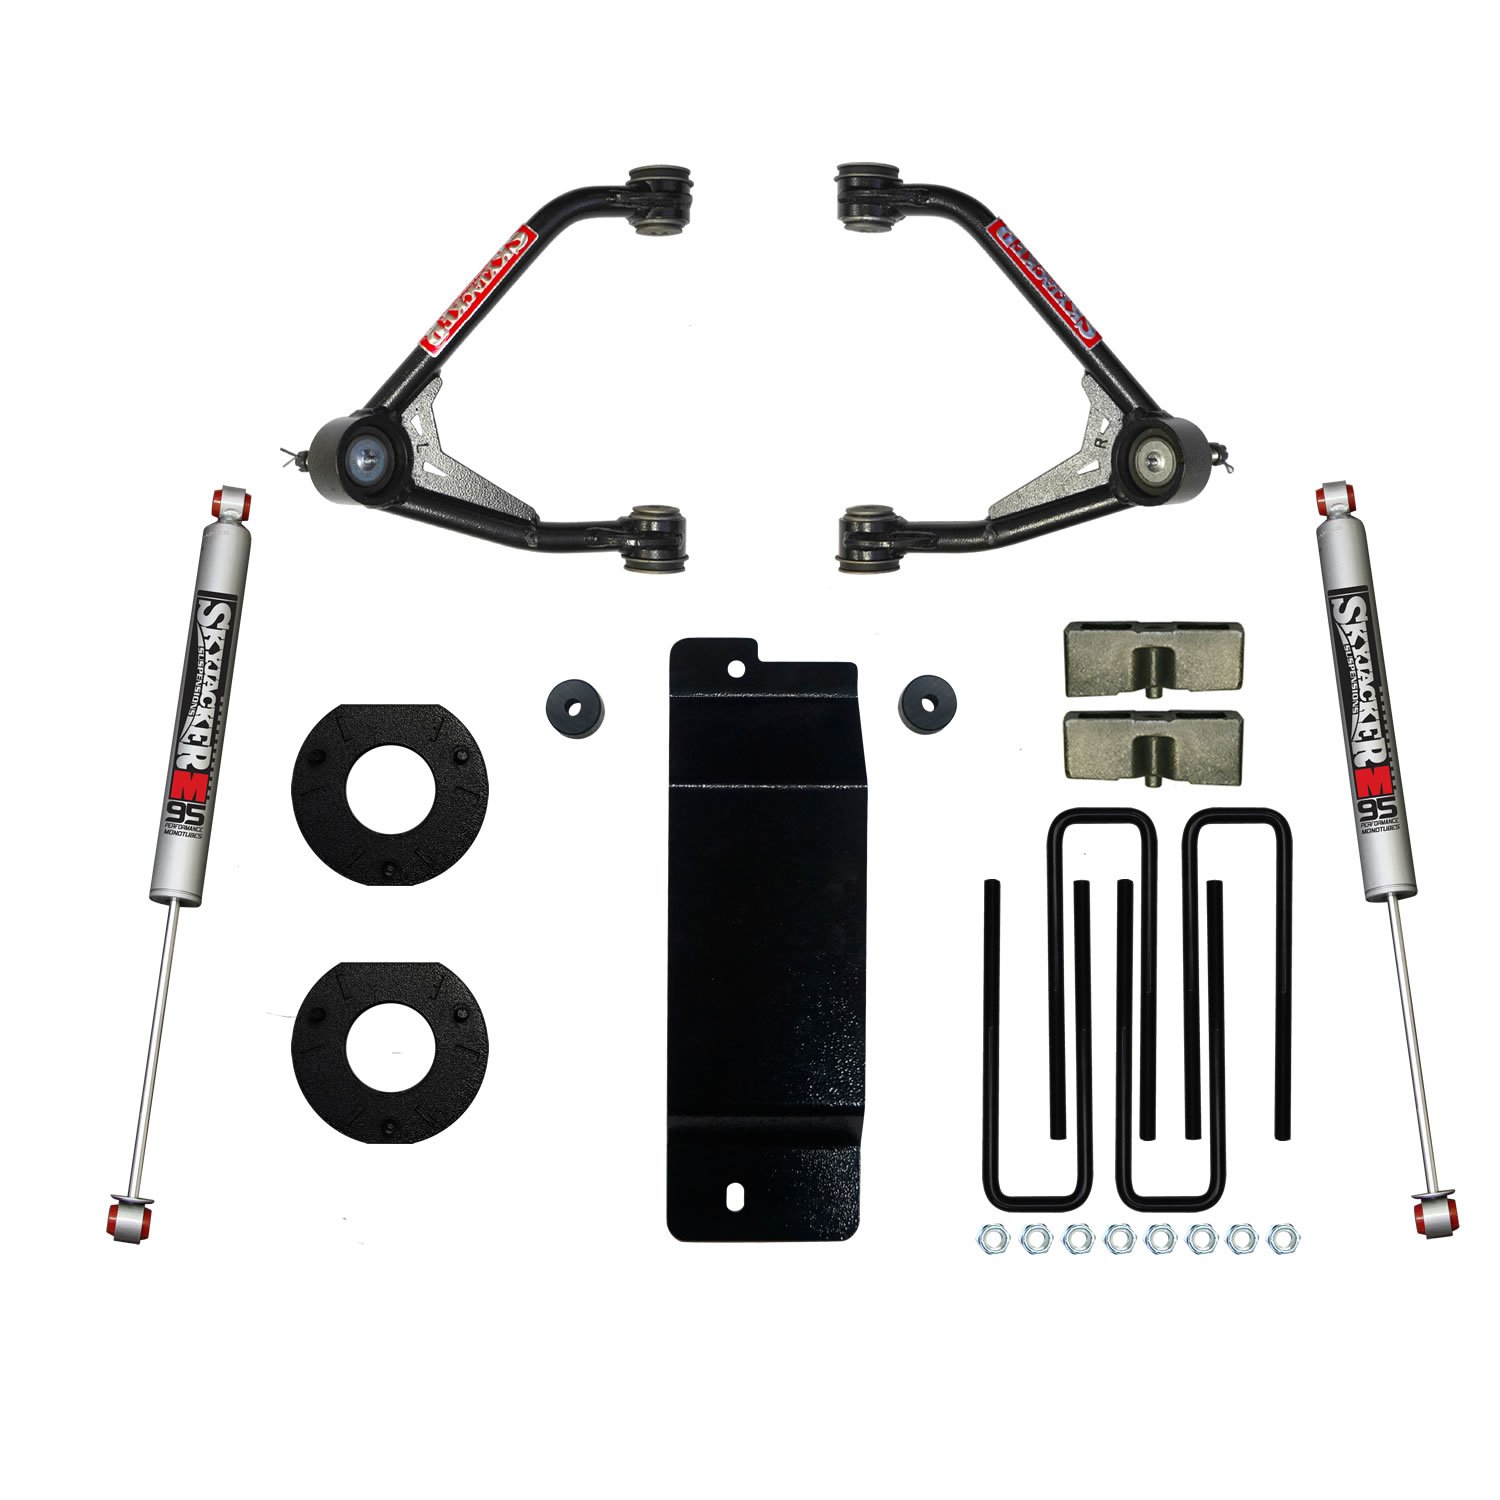 3.500-4.000 In. Upper Control Arm Lift Kit with Monotube M9500 Rear Shocks for 2014-2016 GM 1500 4WD